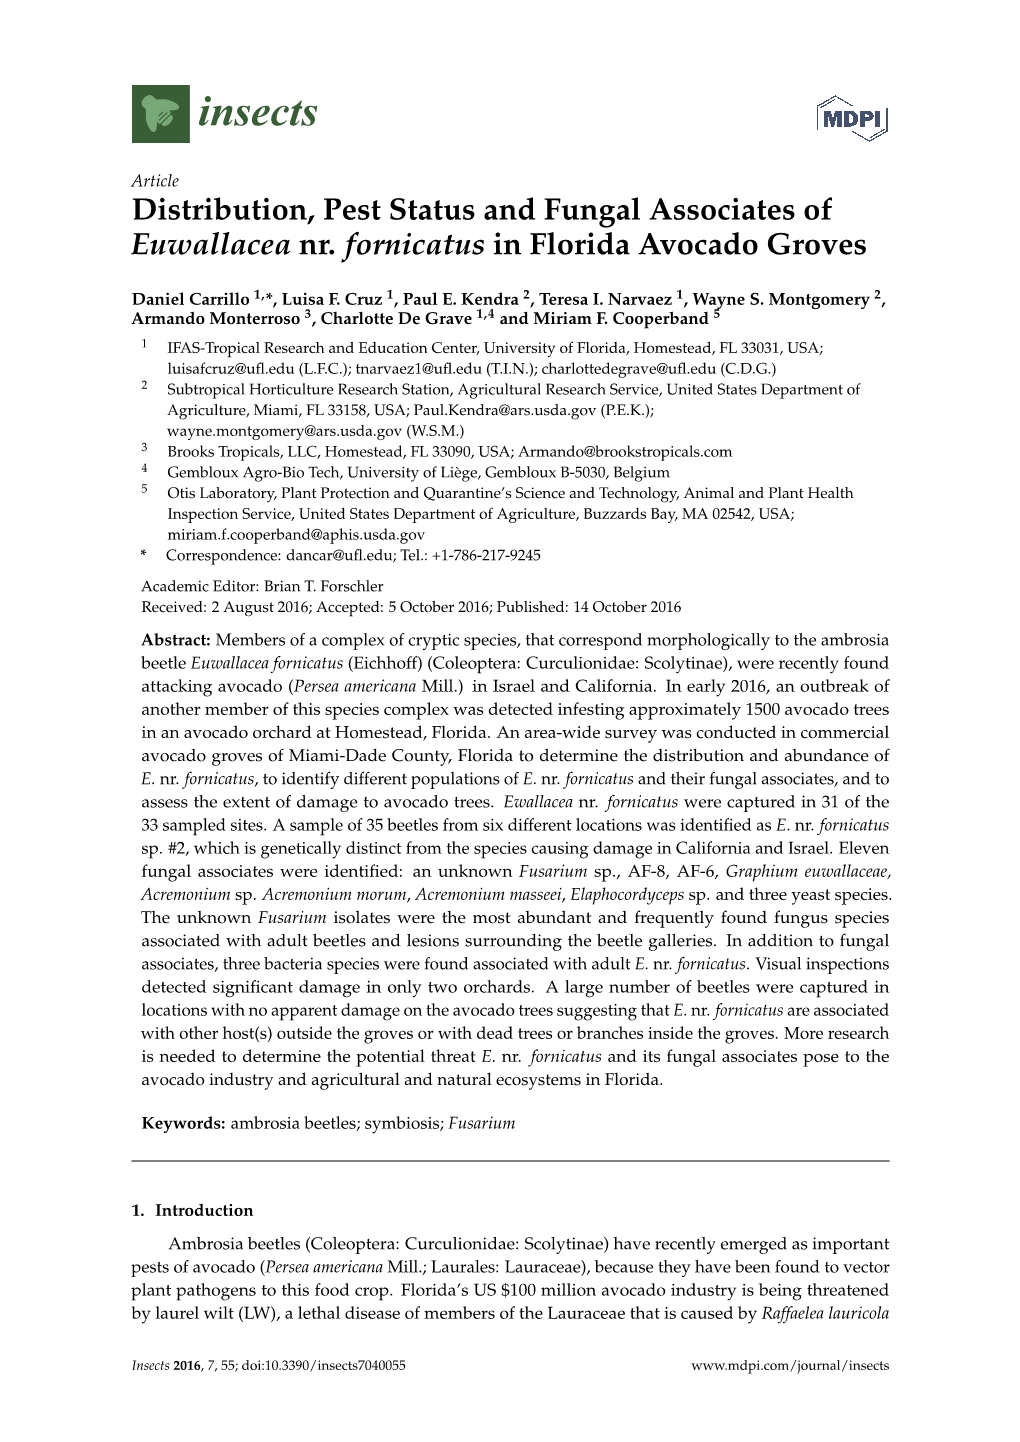 Distribution, Pest Status and Fungal Associates of Euwallacea Nr. Fornicatus in Florida Avocado Groves